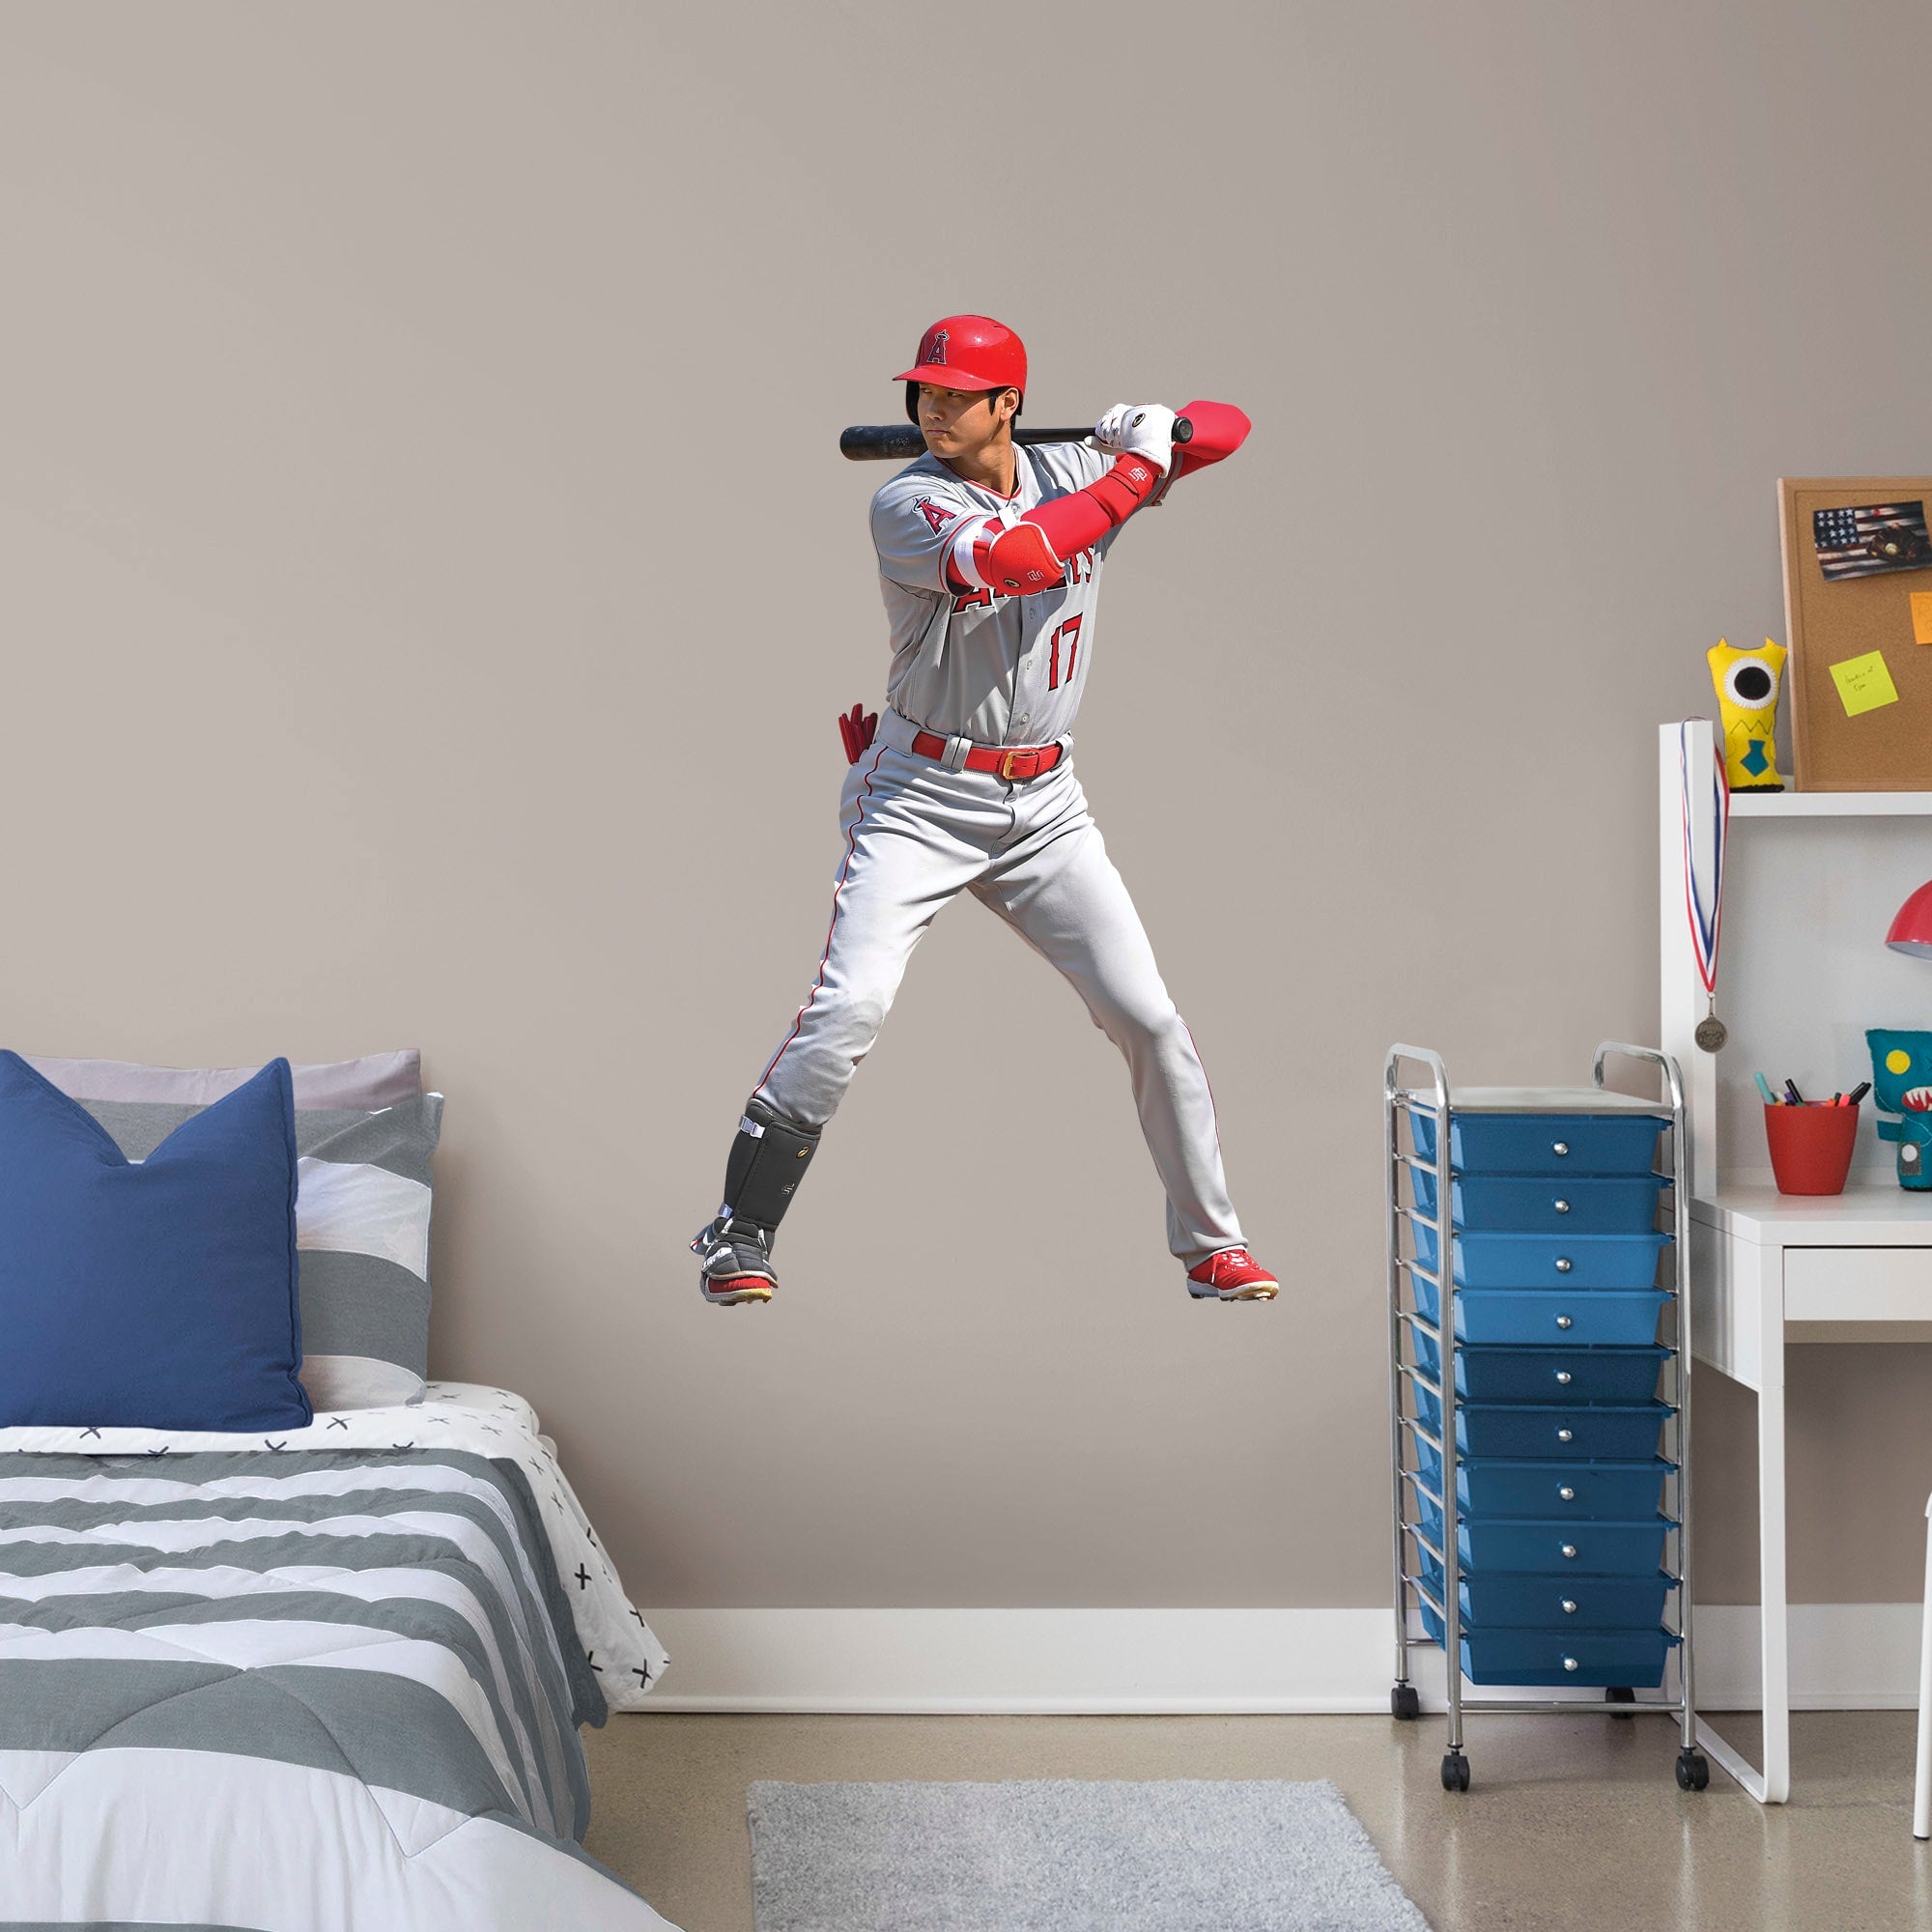 Shohei Ohtani for LA Angels: At Bat - Officially Licensed MLB Removable Wall Decal Giant Athlete + 2 Decals (31"W x 51"H) by Fat